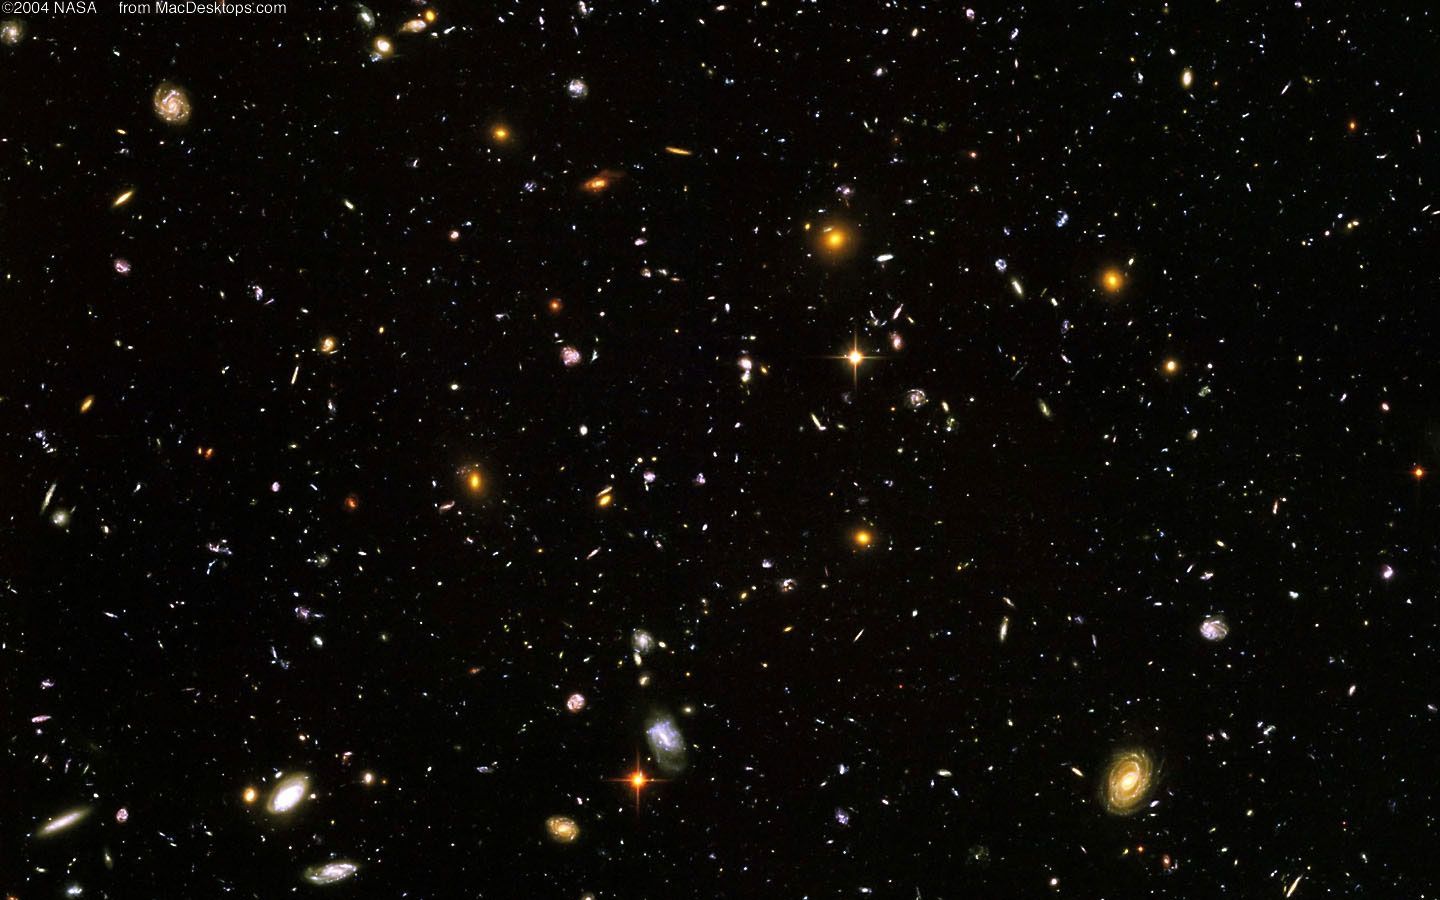 Hubble deep field image outer space wallpaper - (#168236) - High ...